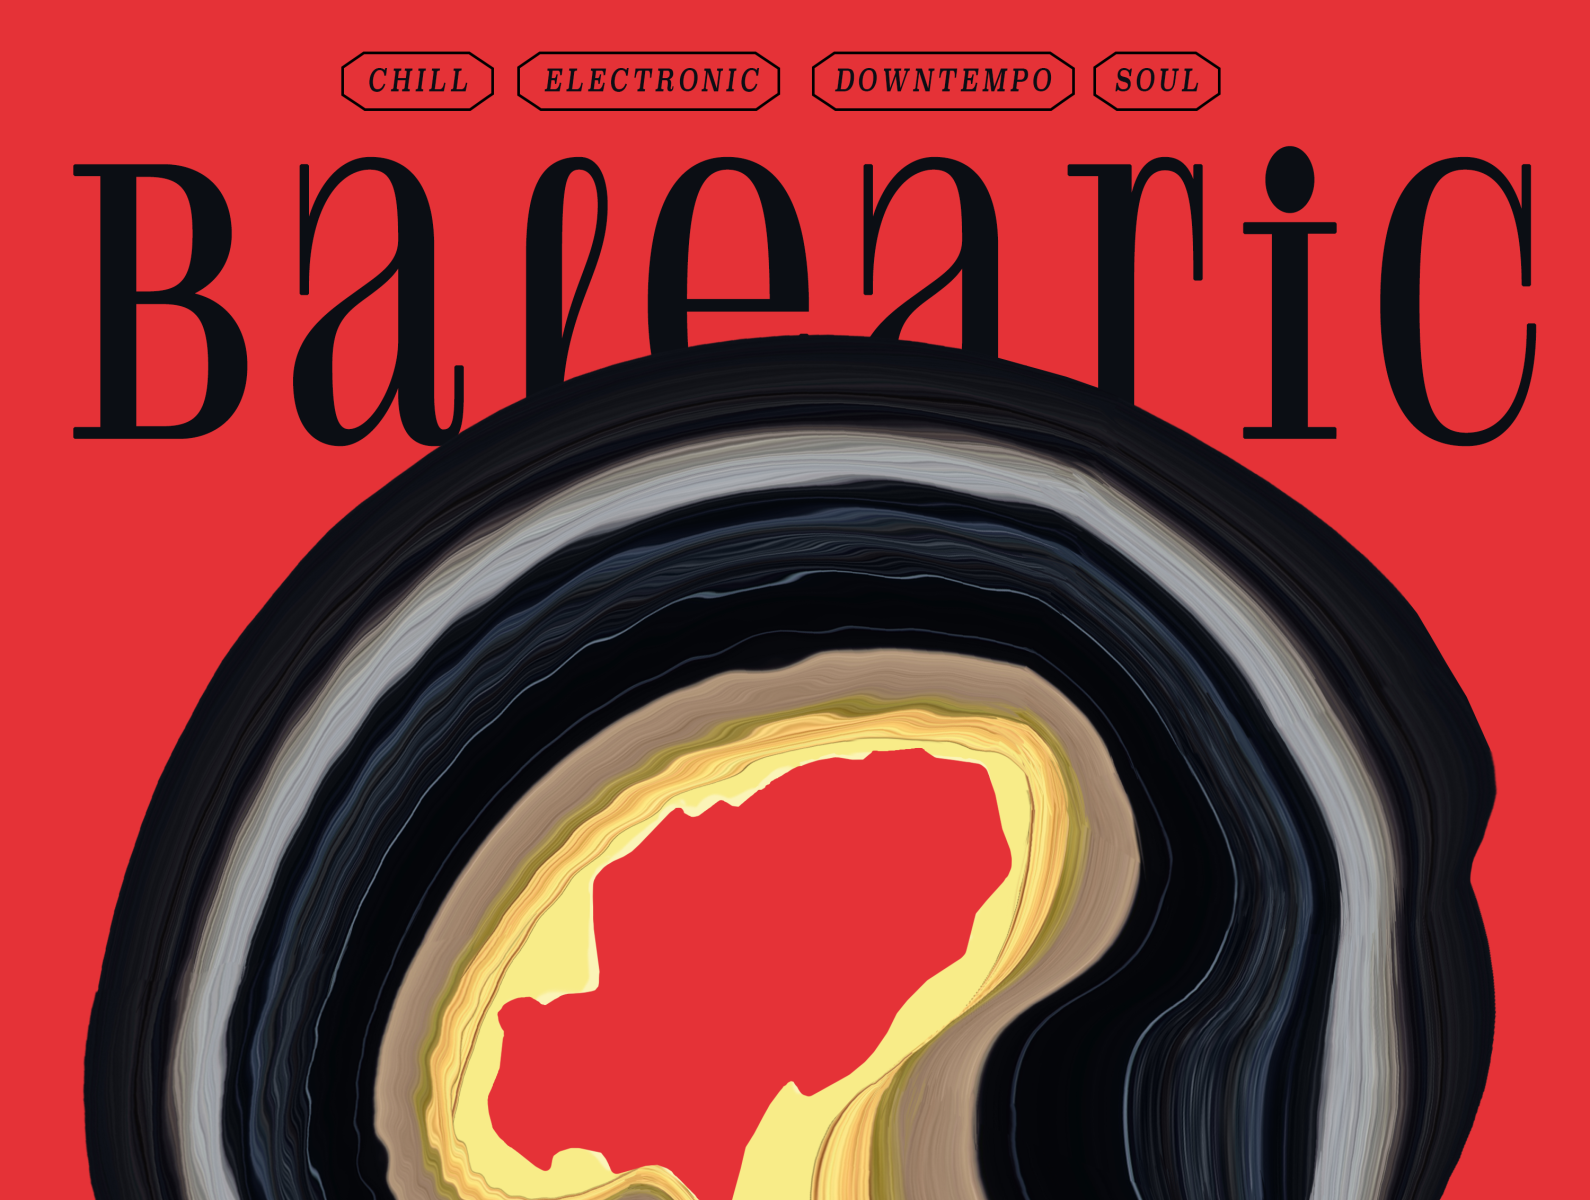 Balearic Cover by Anton Shineft on Dribbble